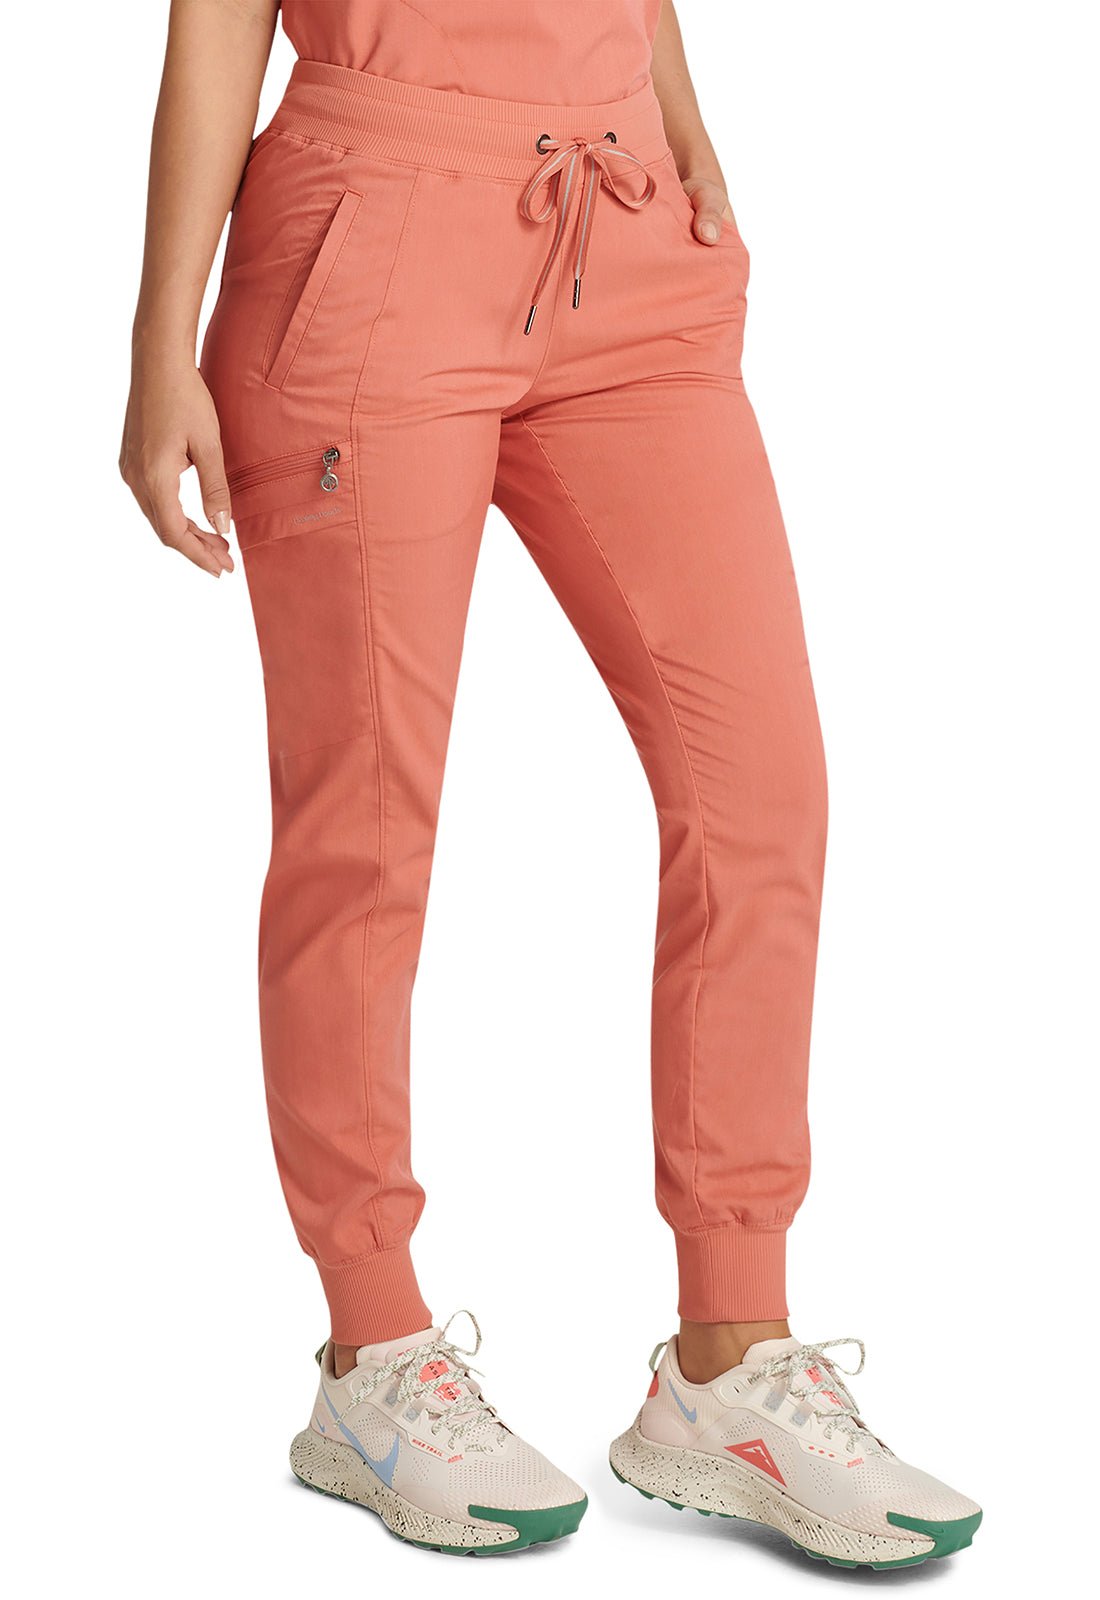 Healing Hands Toby Jogger Pant 9244 in Dried Rose, Pink Popsicle, Soft Clay - Scrubs Select